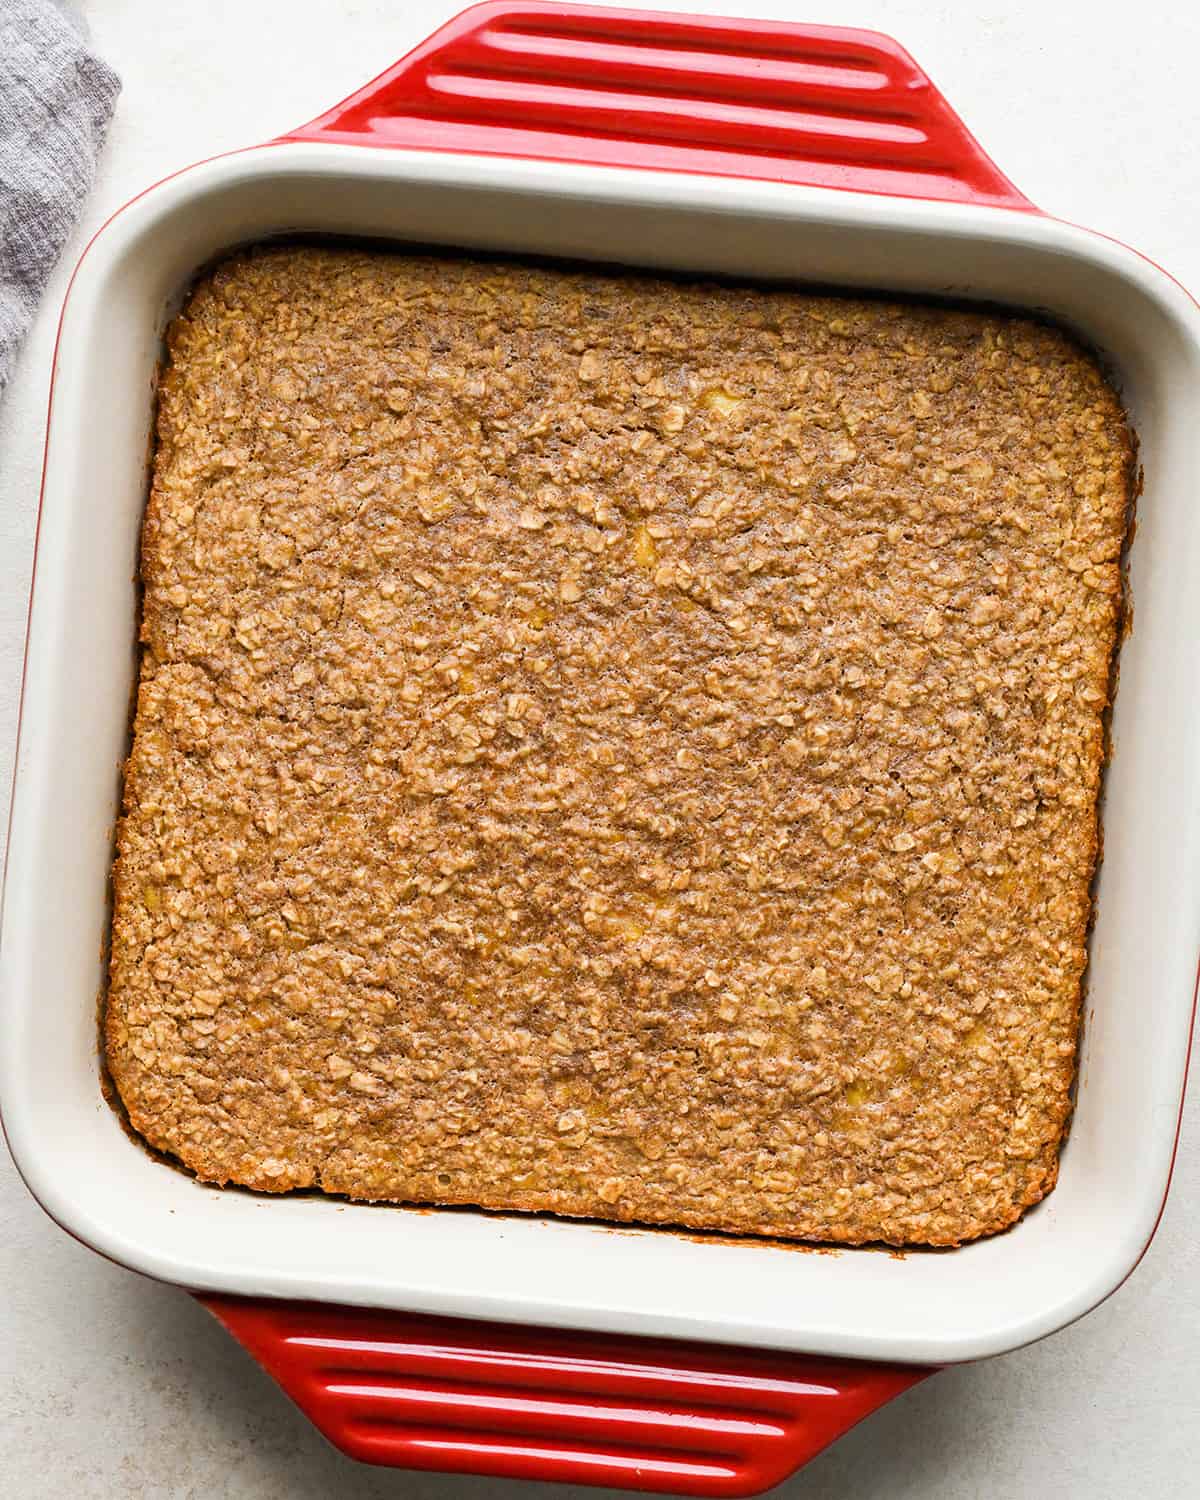 Peanut Butter Banana Baked Oatmeal in a baking dish after baking